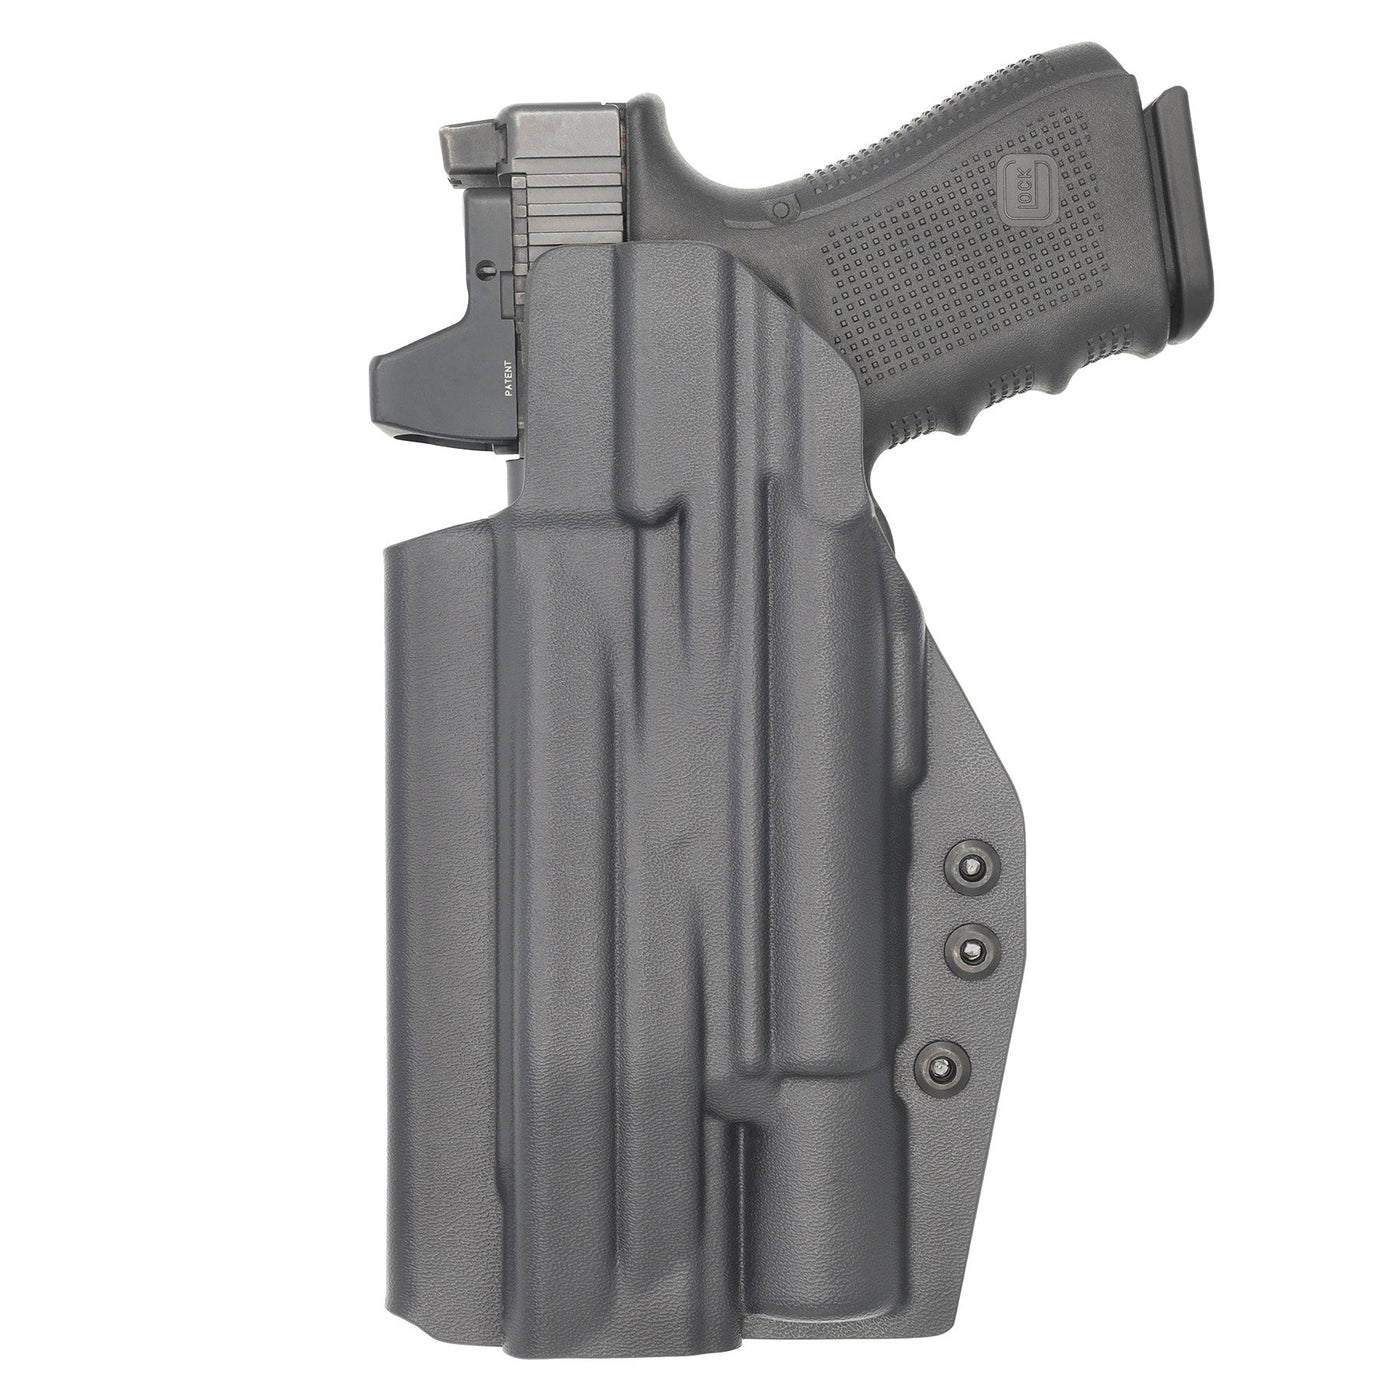 C&G Holsters Quickship IWB Tactical Glock 20/21 Surefire X300 in holstered position back view